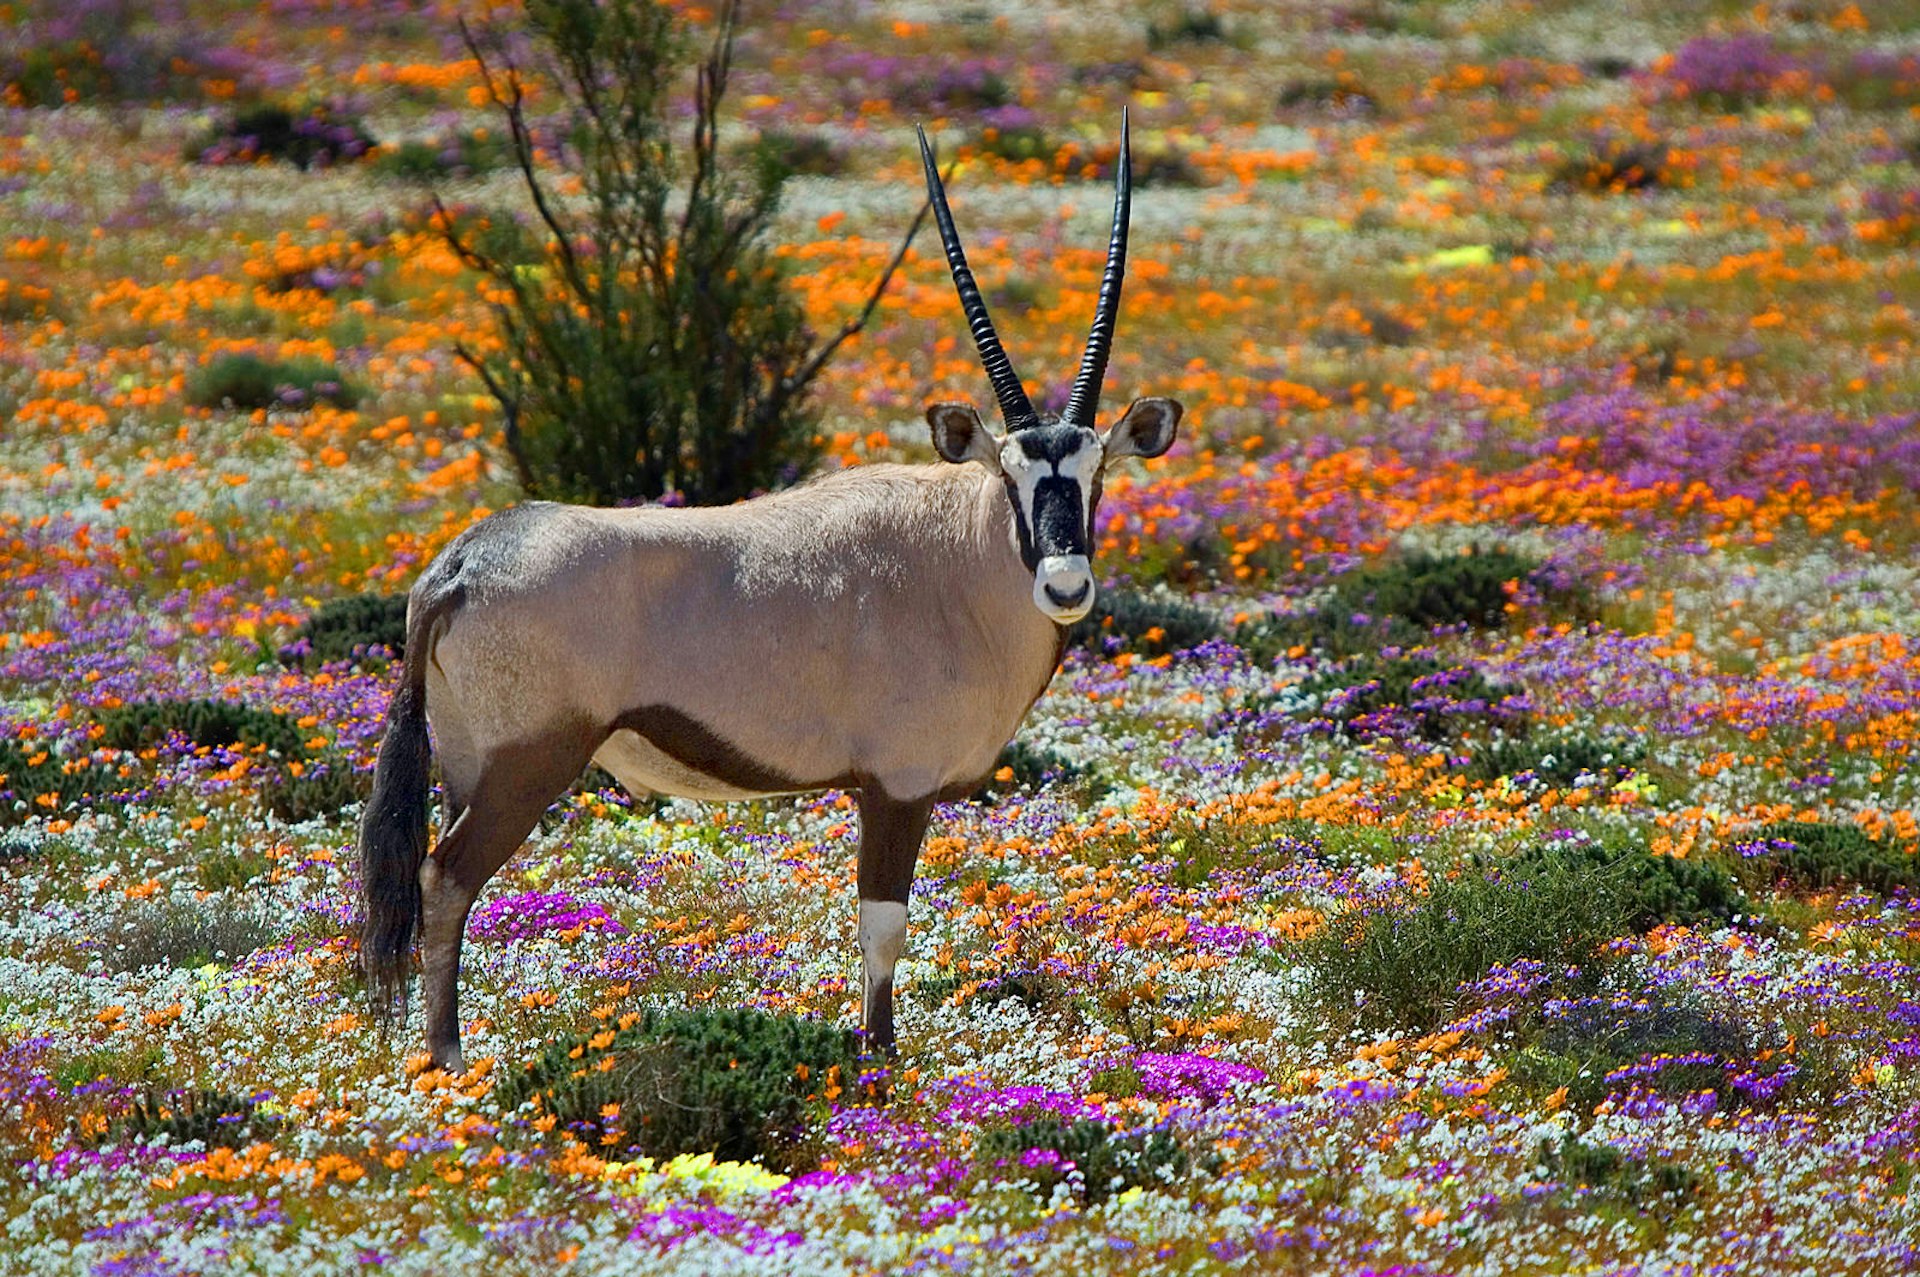 A horned oryx stands in a field of orange, purple and white flowers